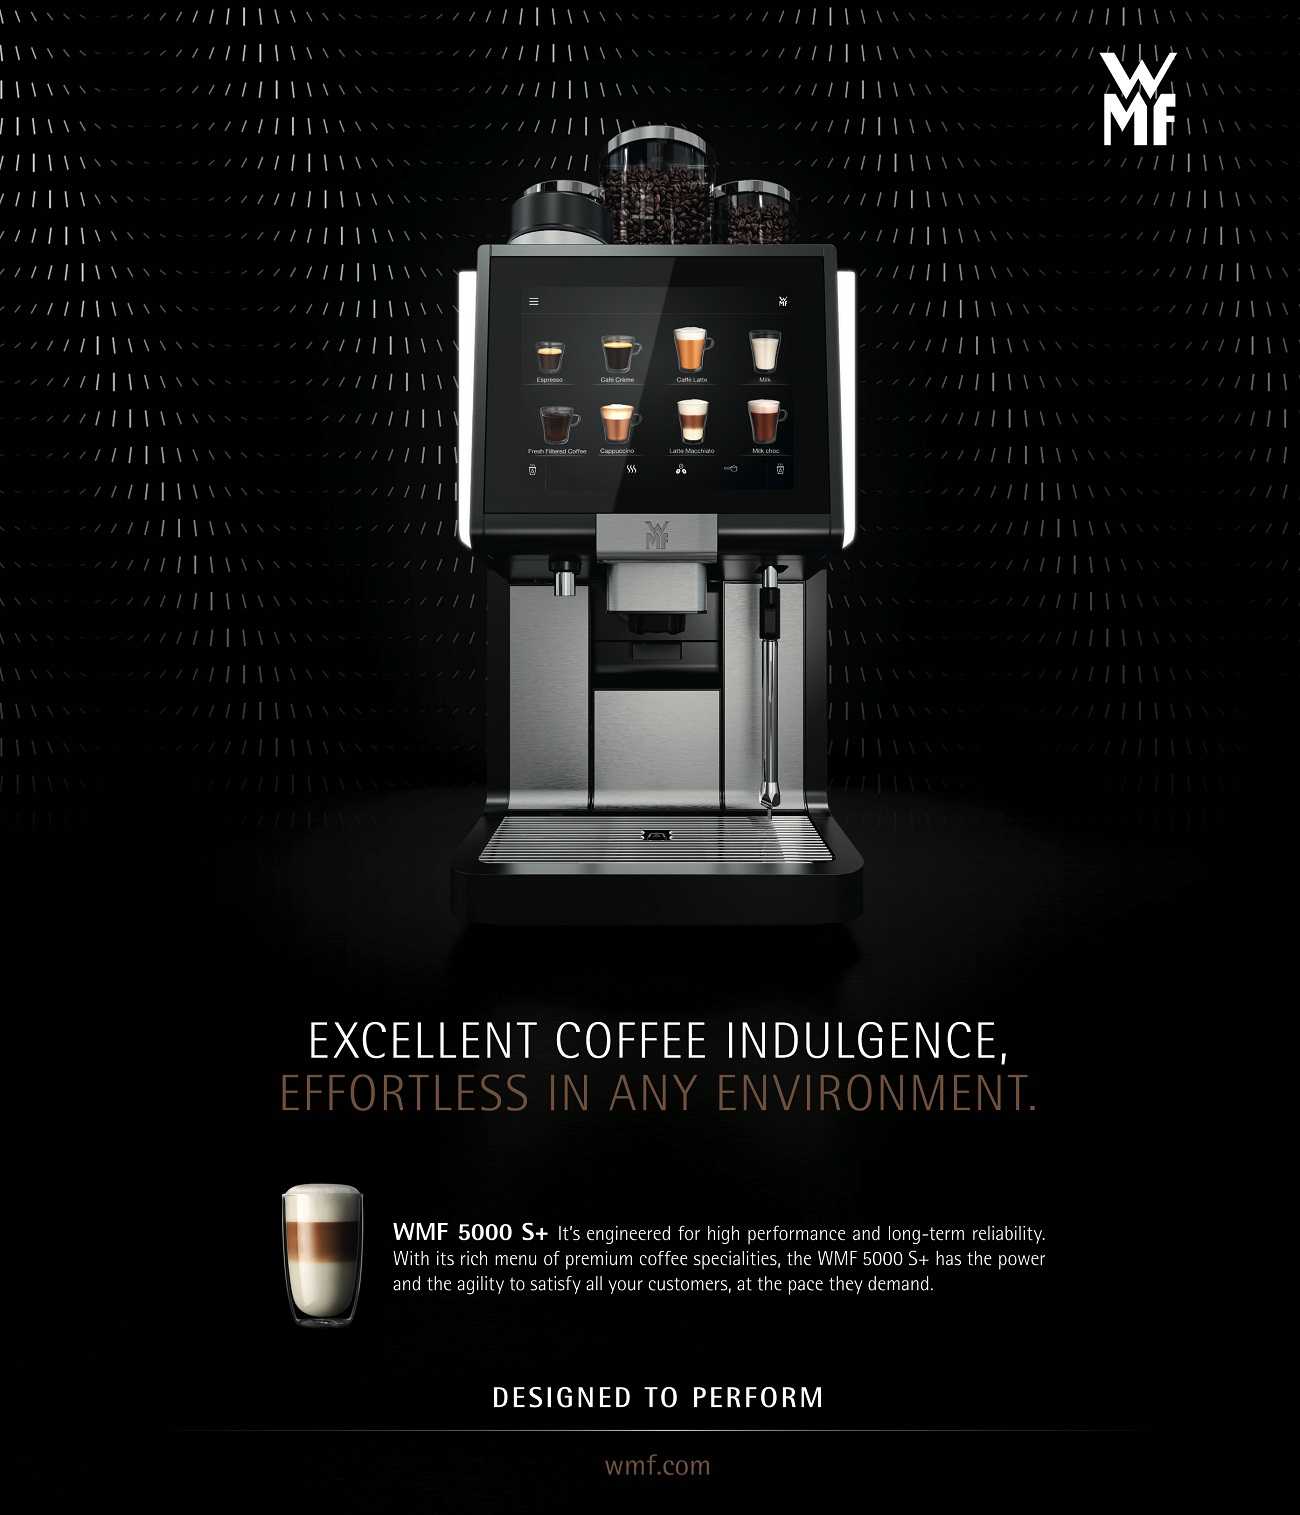 Industrial Coffee Machine for Consumer Environments